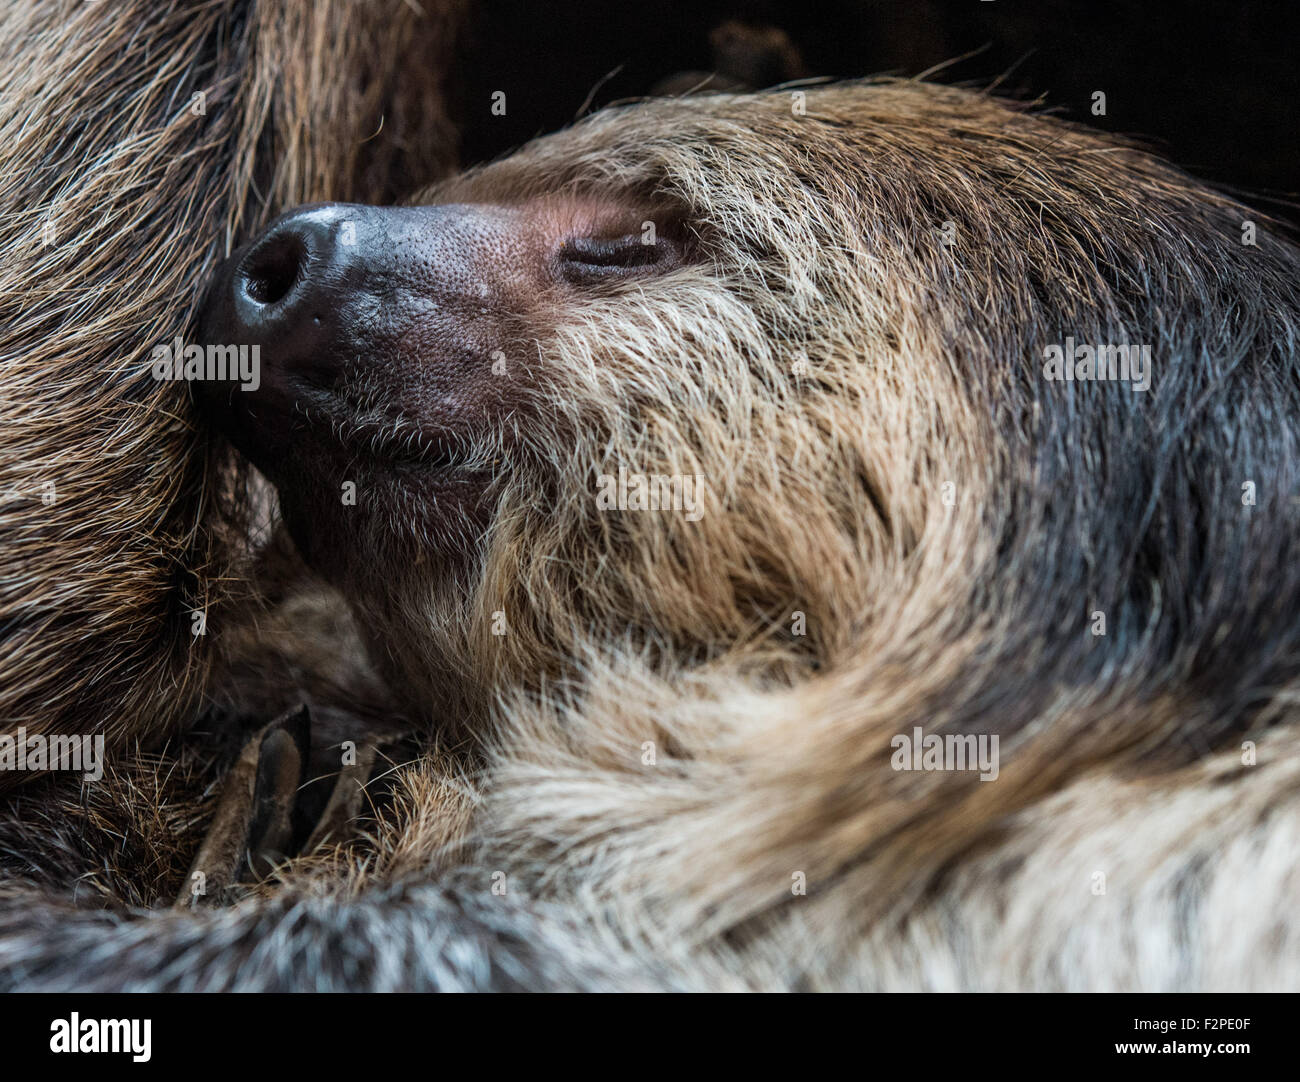 Dortmund, Germany. 22nd Sep, 2015. A Linne's two-toed sloth sleeping in the zoo in Dortmund, Germany, 22 September 2015. The nocturnal animals spend most of the day asleep. PHOTO: BERND THISSEN/DPA/Alamy Live News Stock Photo